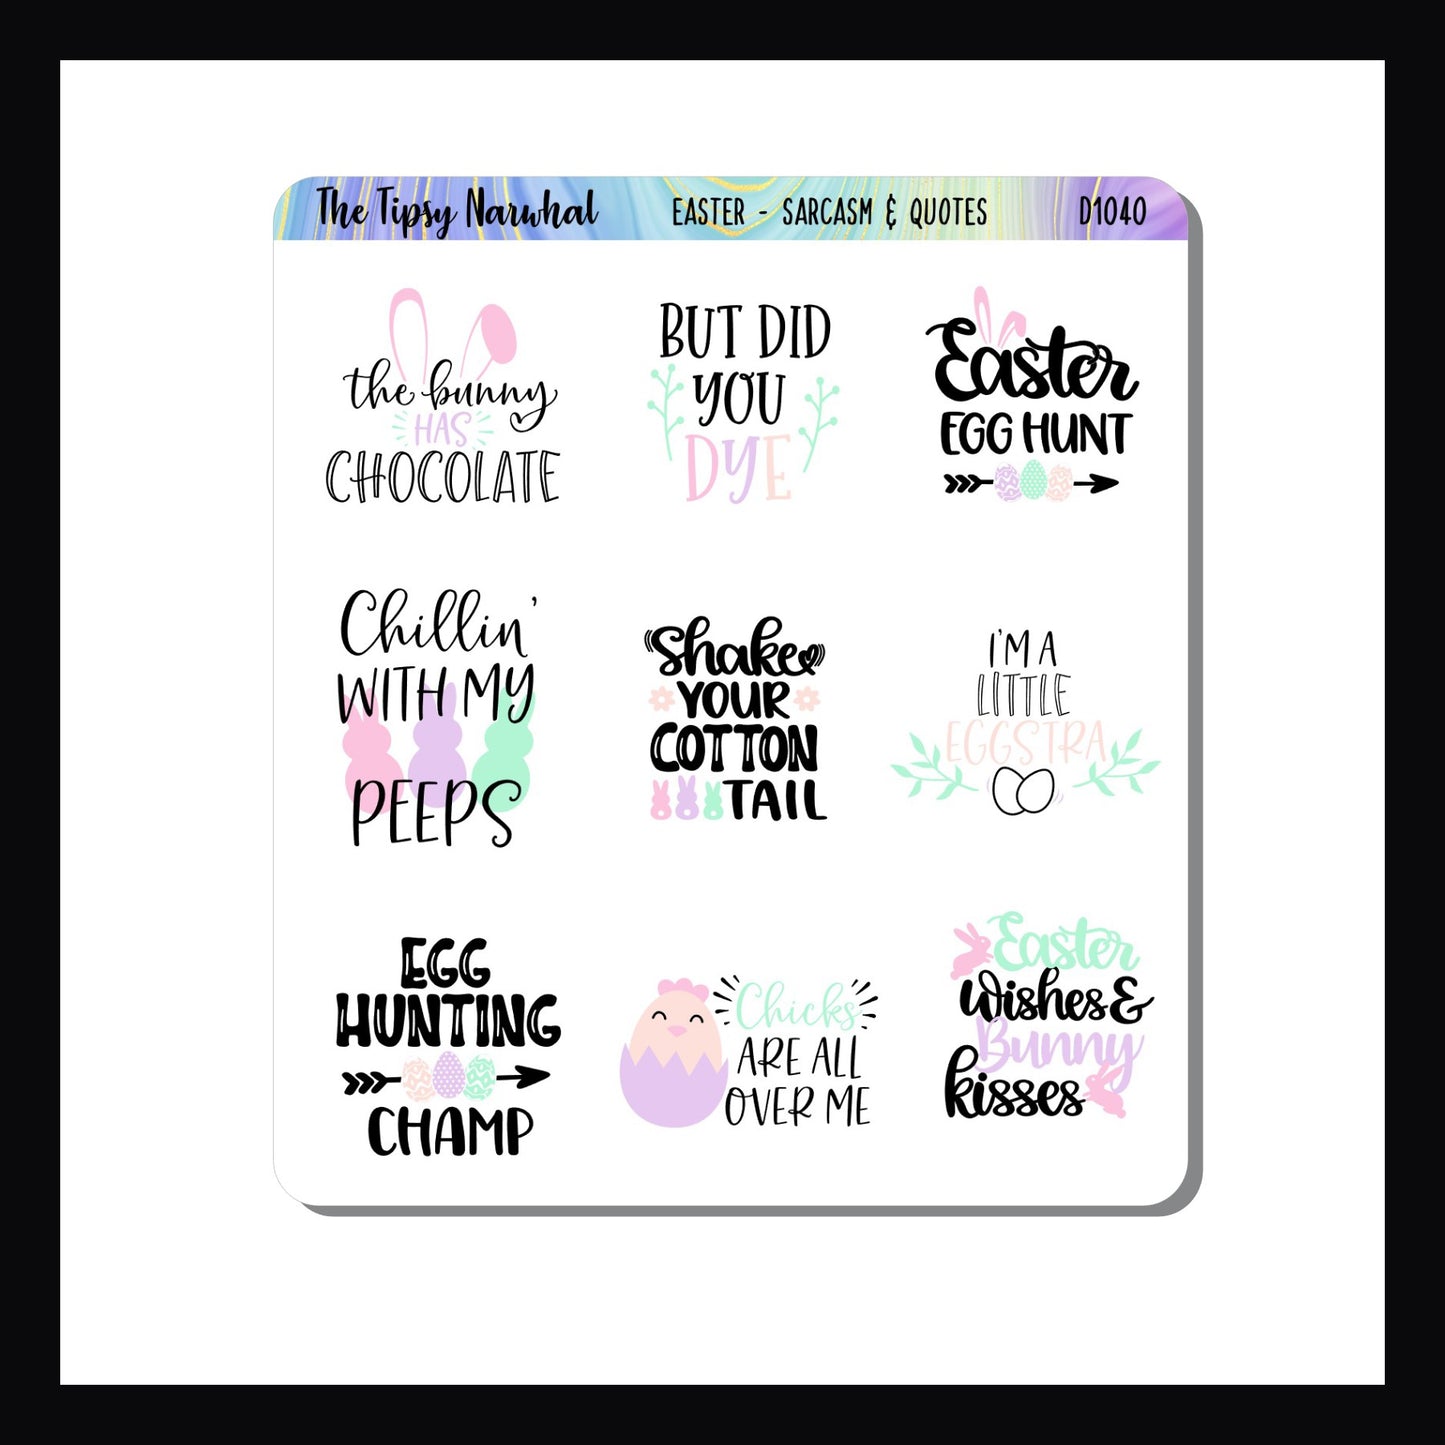 Hidden Eggs Journal Kit - Easter Sarcasm & Quotes add-on sheet.  The Easter Sarcasm & Quotes sheet is a half sheet featuring 9 different quotes, some sarcastic, others cute about the Easter Holiday.